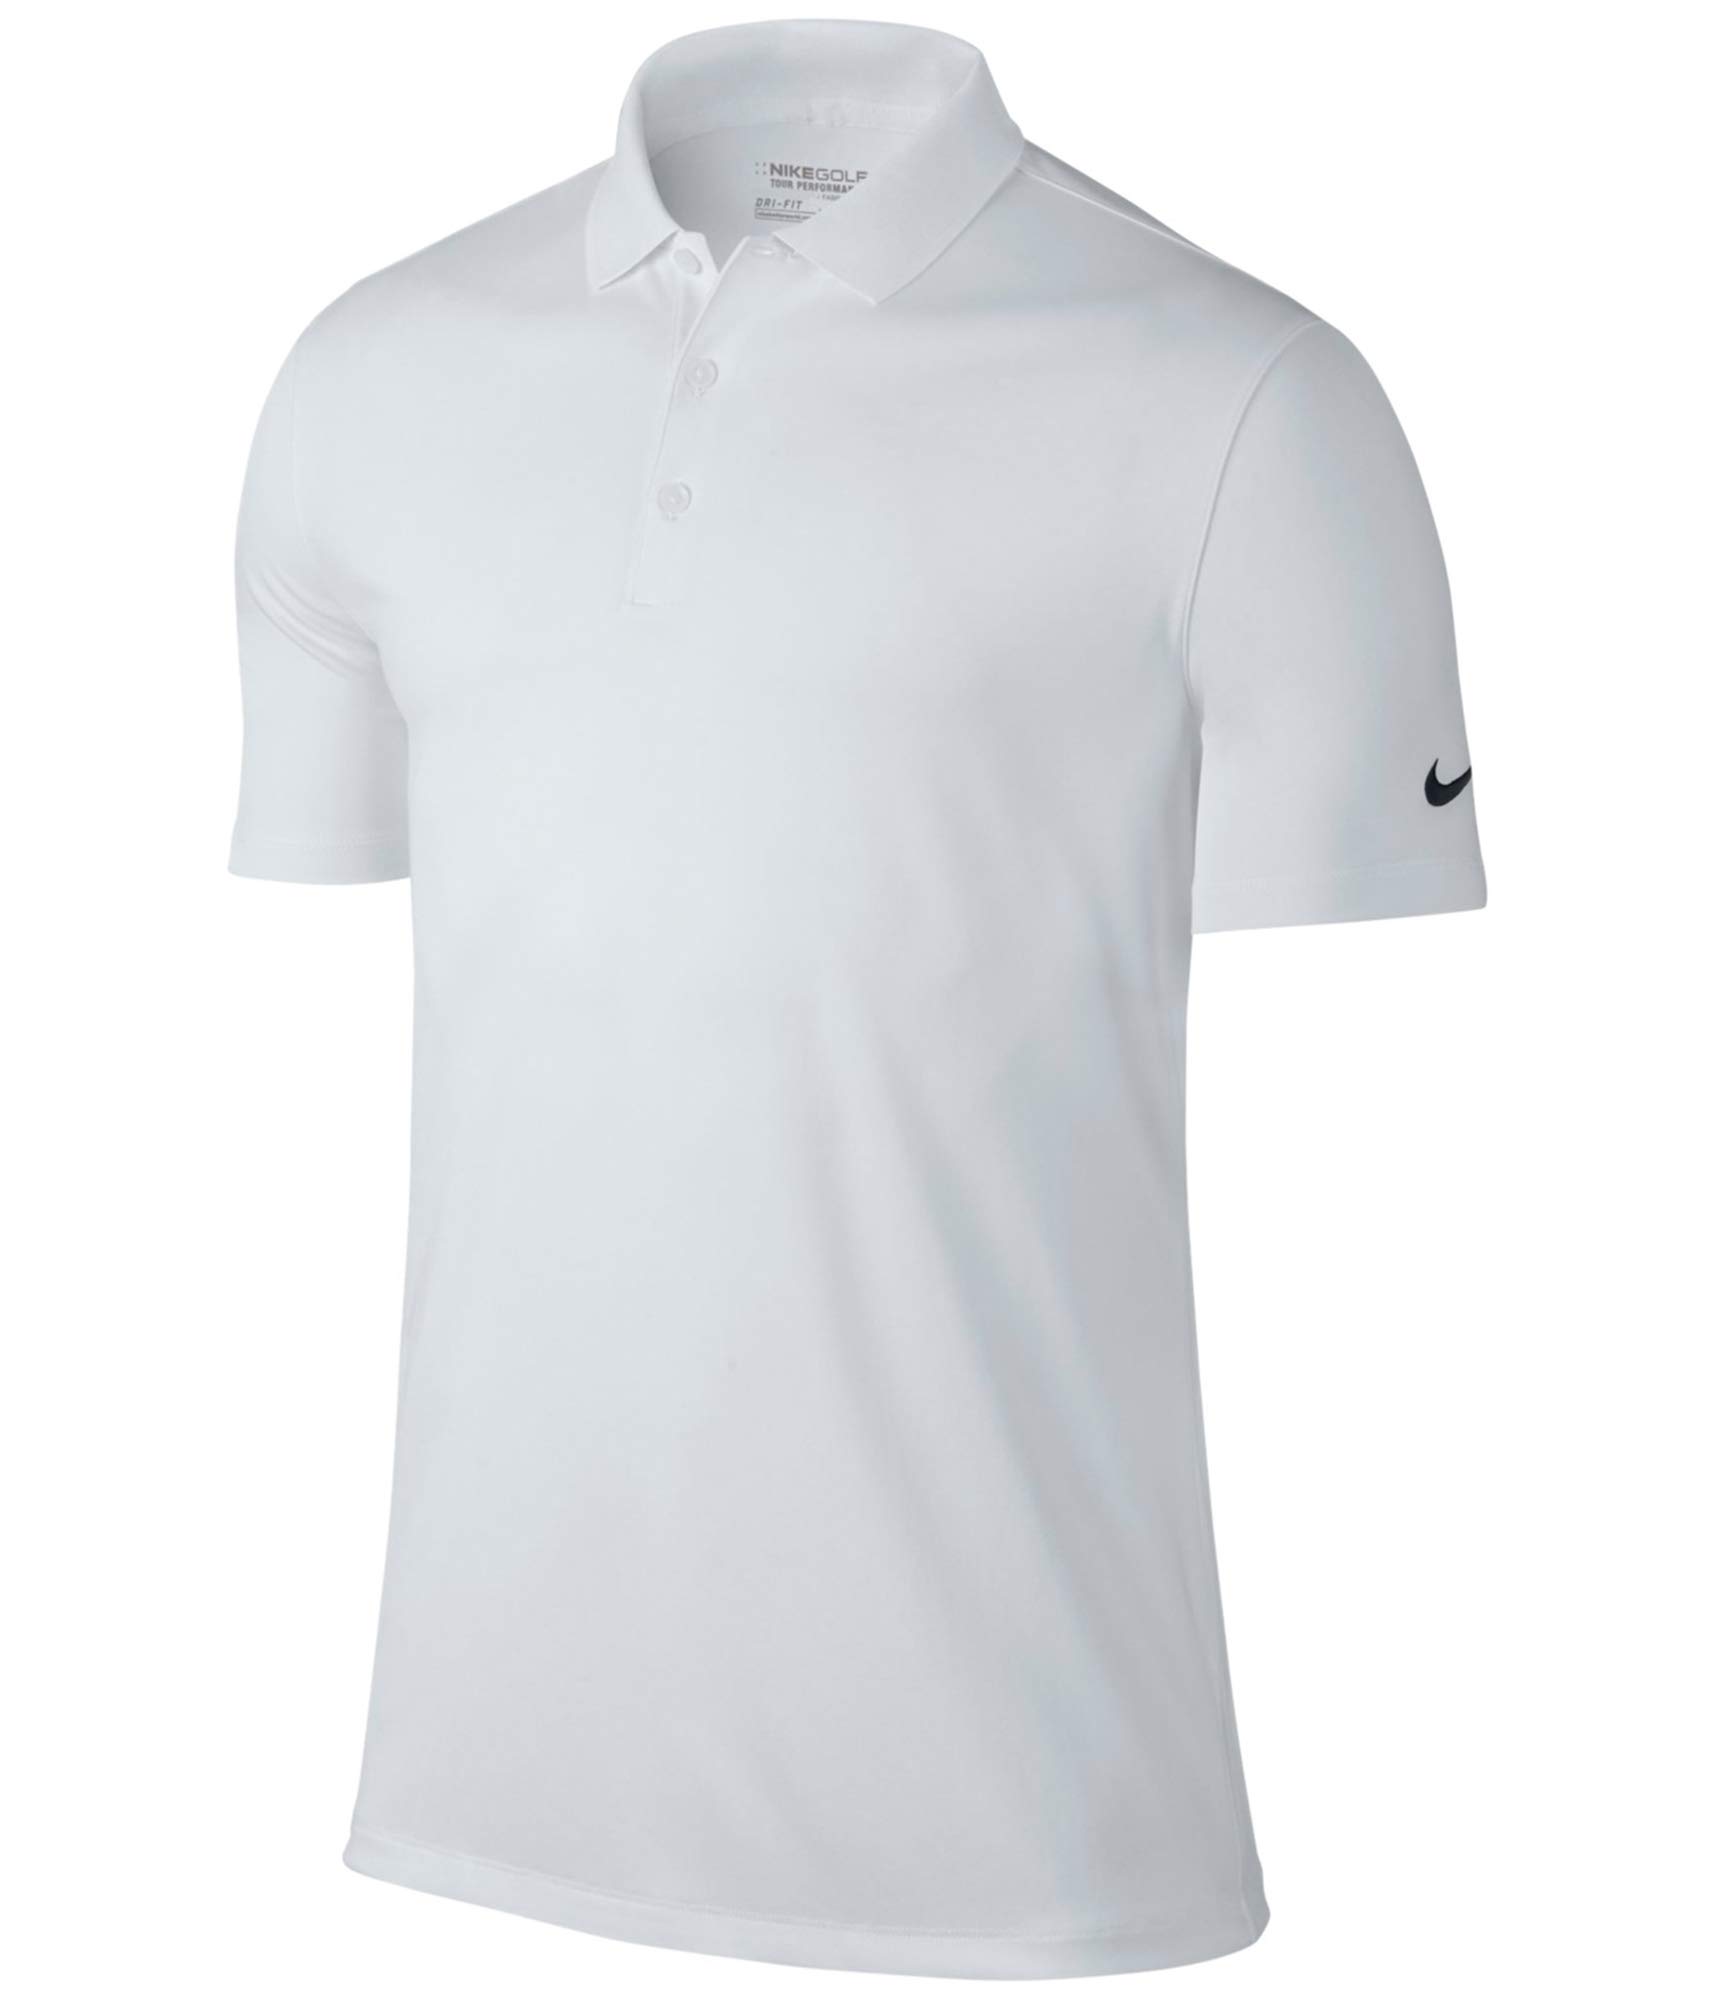 NIKE Men's Dry Victory Polo